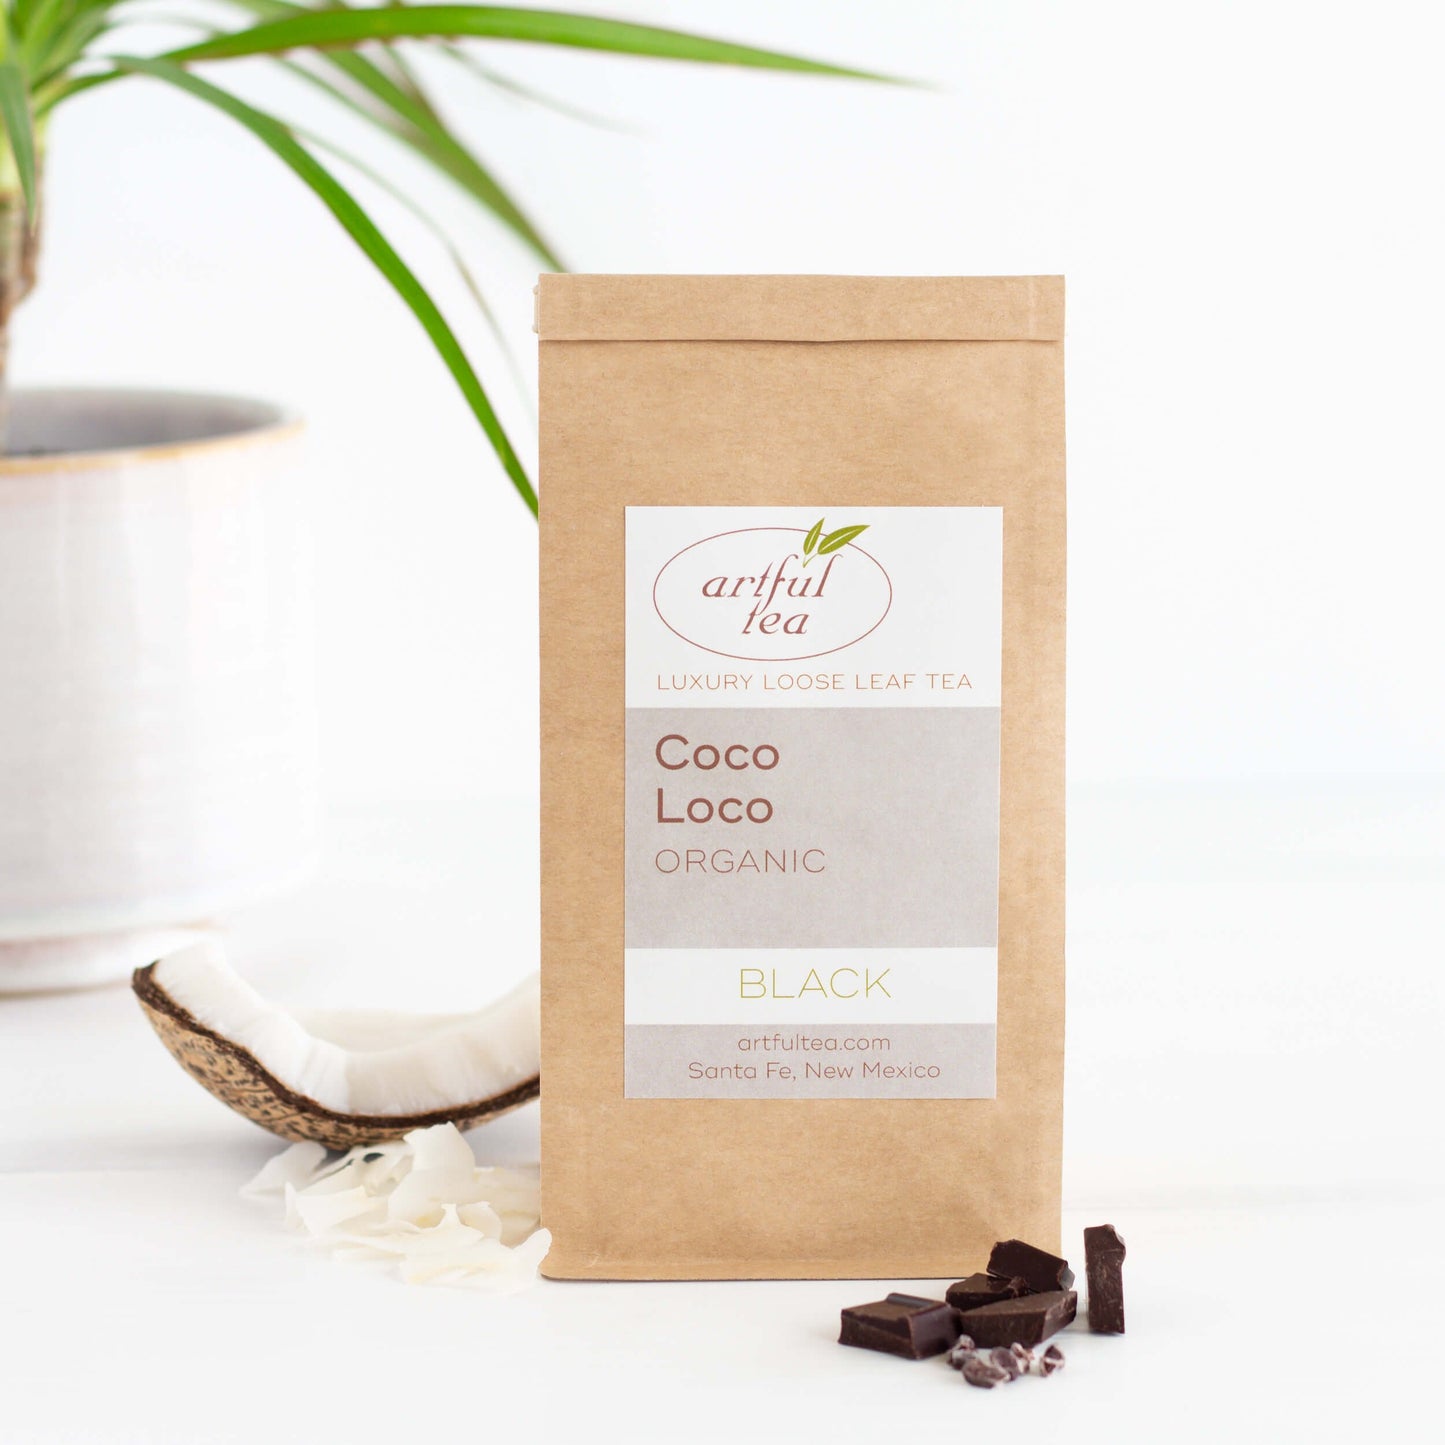 Coco Loco Organic Black Tea shown packaged in a kraft bag, with chocolate pieces in the foreground, and a broken piece of coconut and a green potted plant in the background 